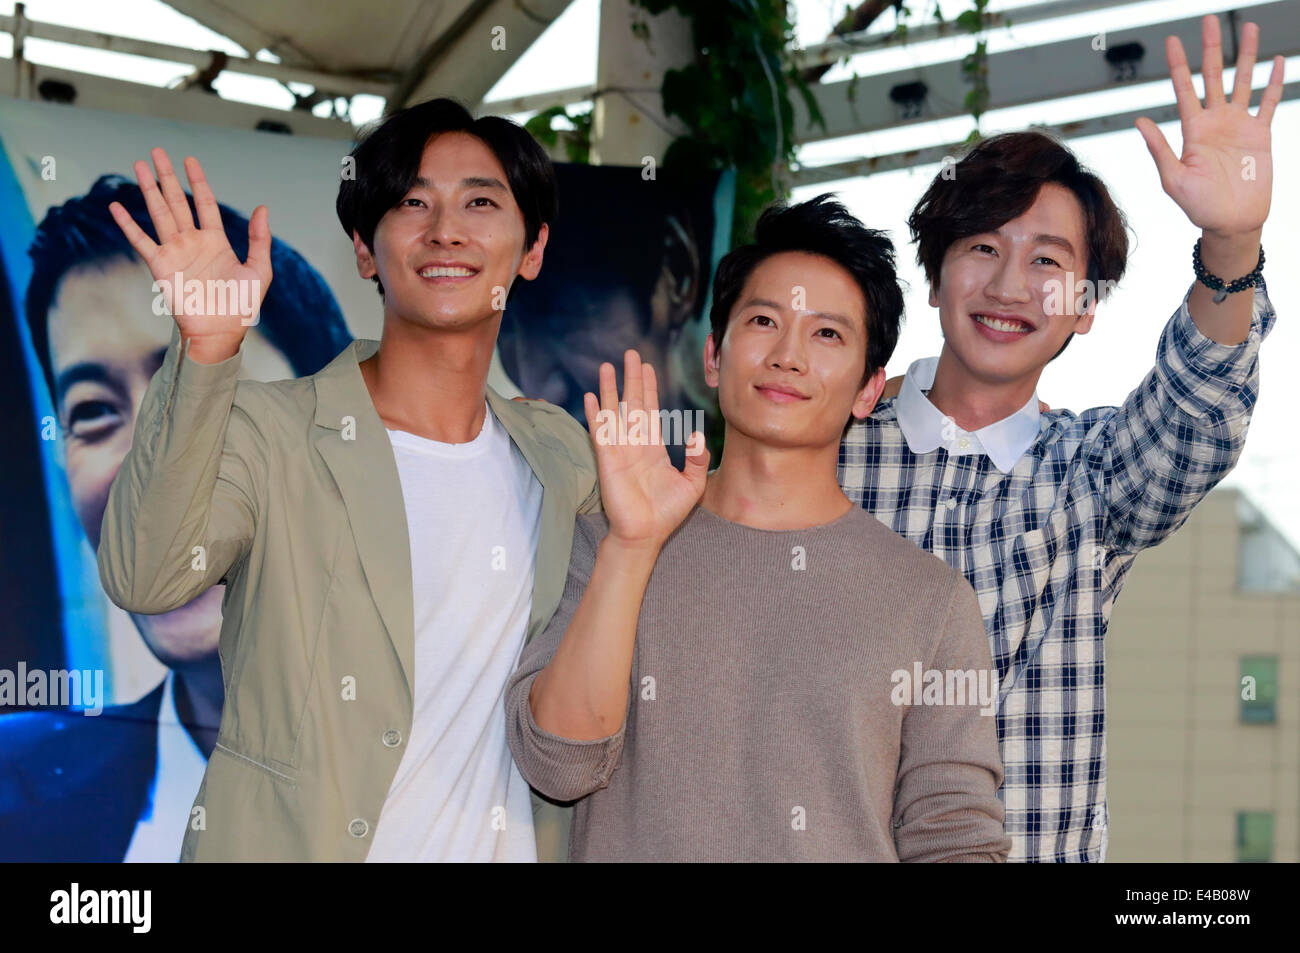 Ju Ji-Hoon, Ji Sung and Lee Kwang-Soo, Jul 4, 2014 : South Korean actors (L-R) Ju Ji-Hoon, Ji Sung and Lee Kwang-Soo wave towards fans during a promotional event for their new movie, Good Friends, in Seoul, South Korea. © Lee Jae-Won/AFLO/Alamy Live News Stock Photo